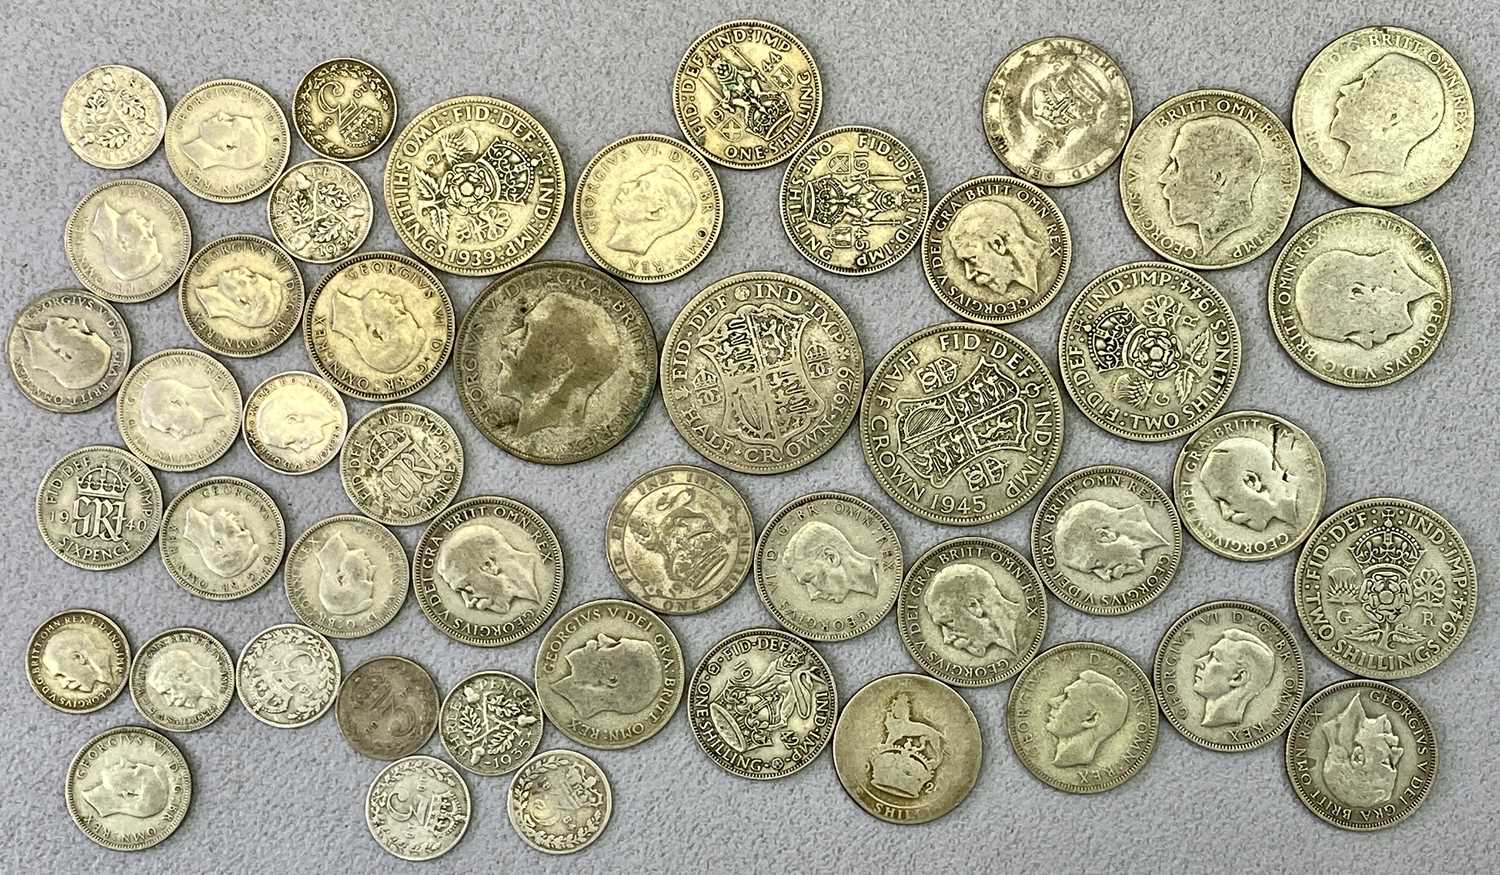 LARGE BRITISH VINTAGE COIN COLLECTION - some overseas, bank notes and current coinage to include - Image 2 of 3